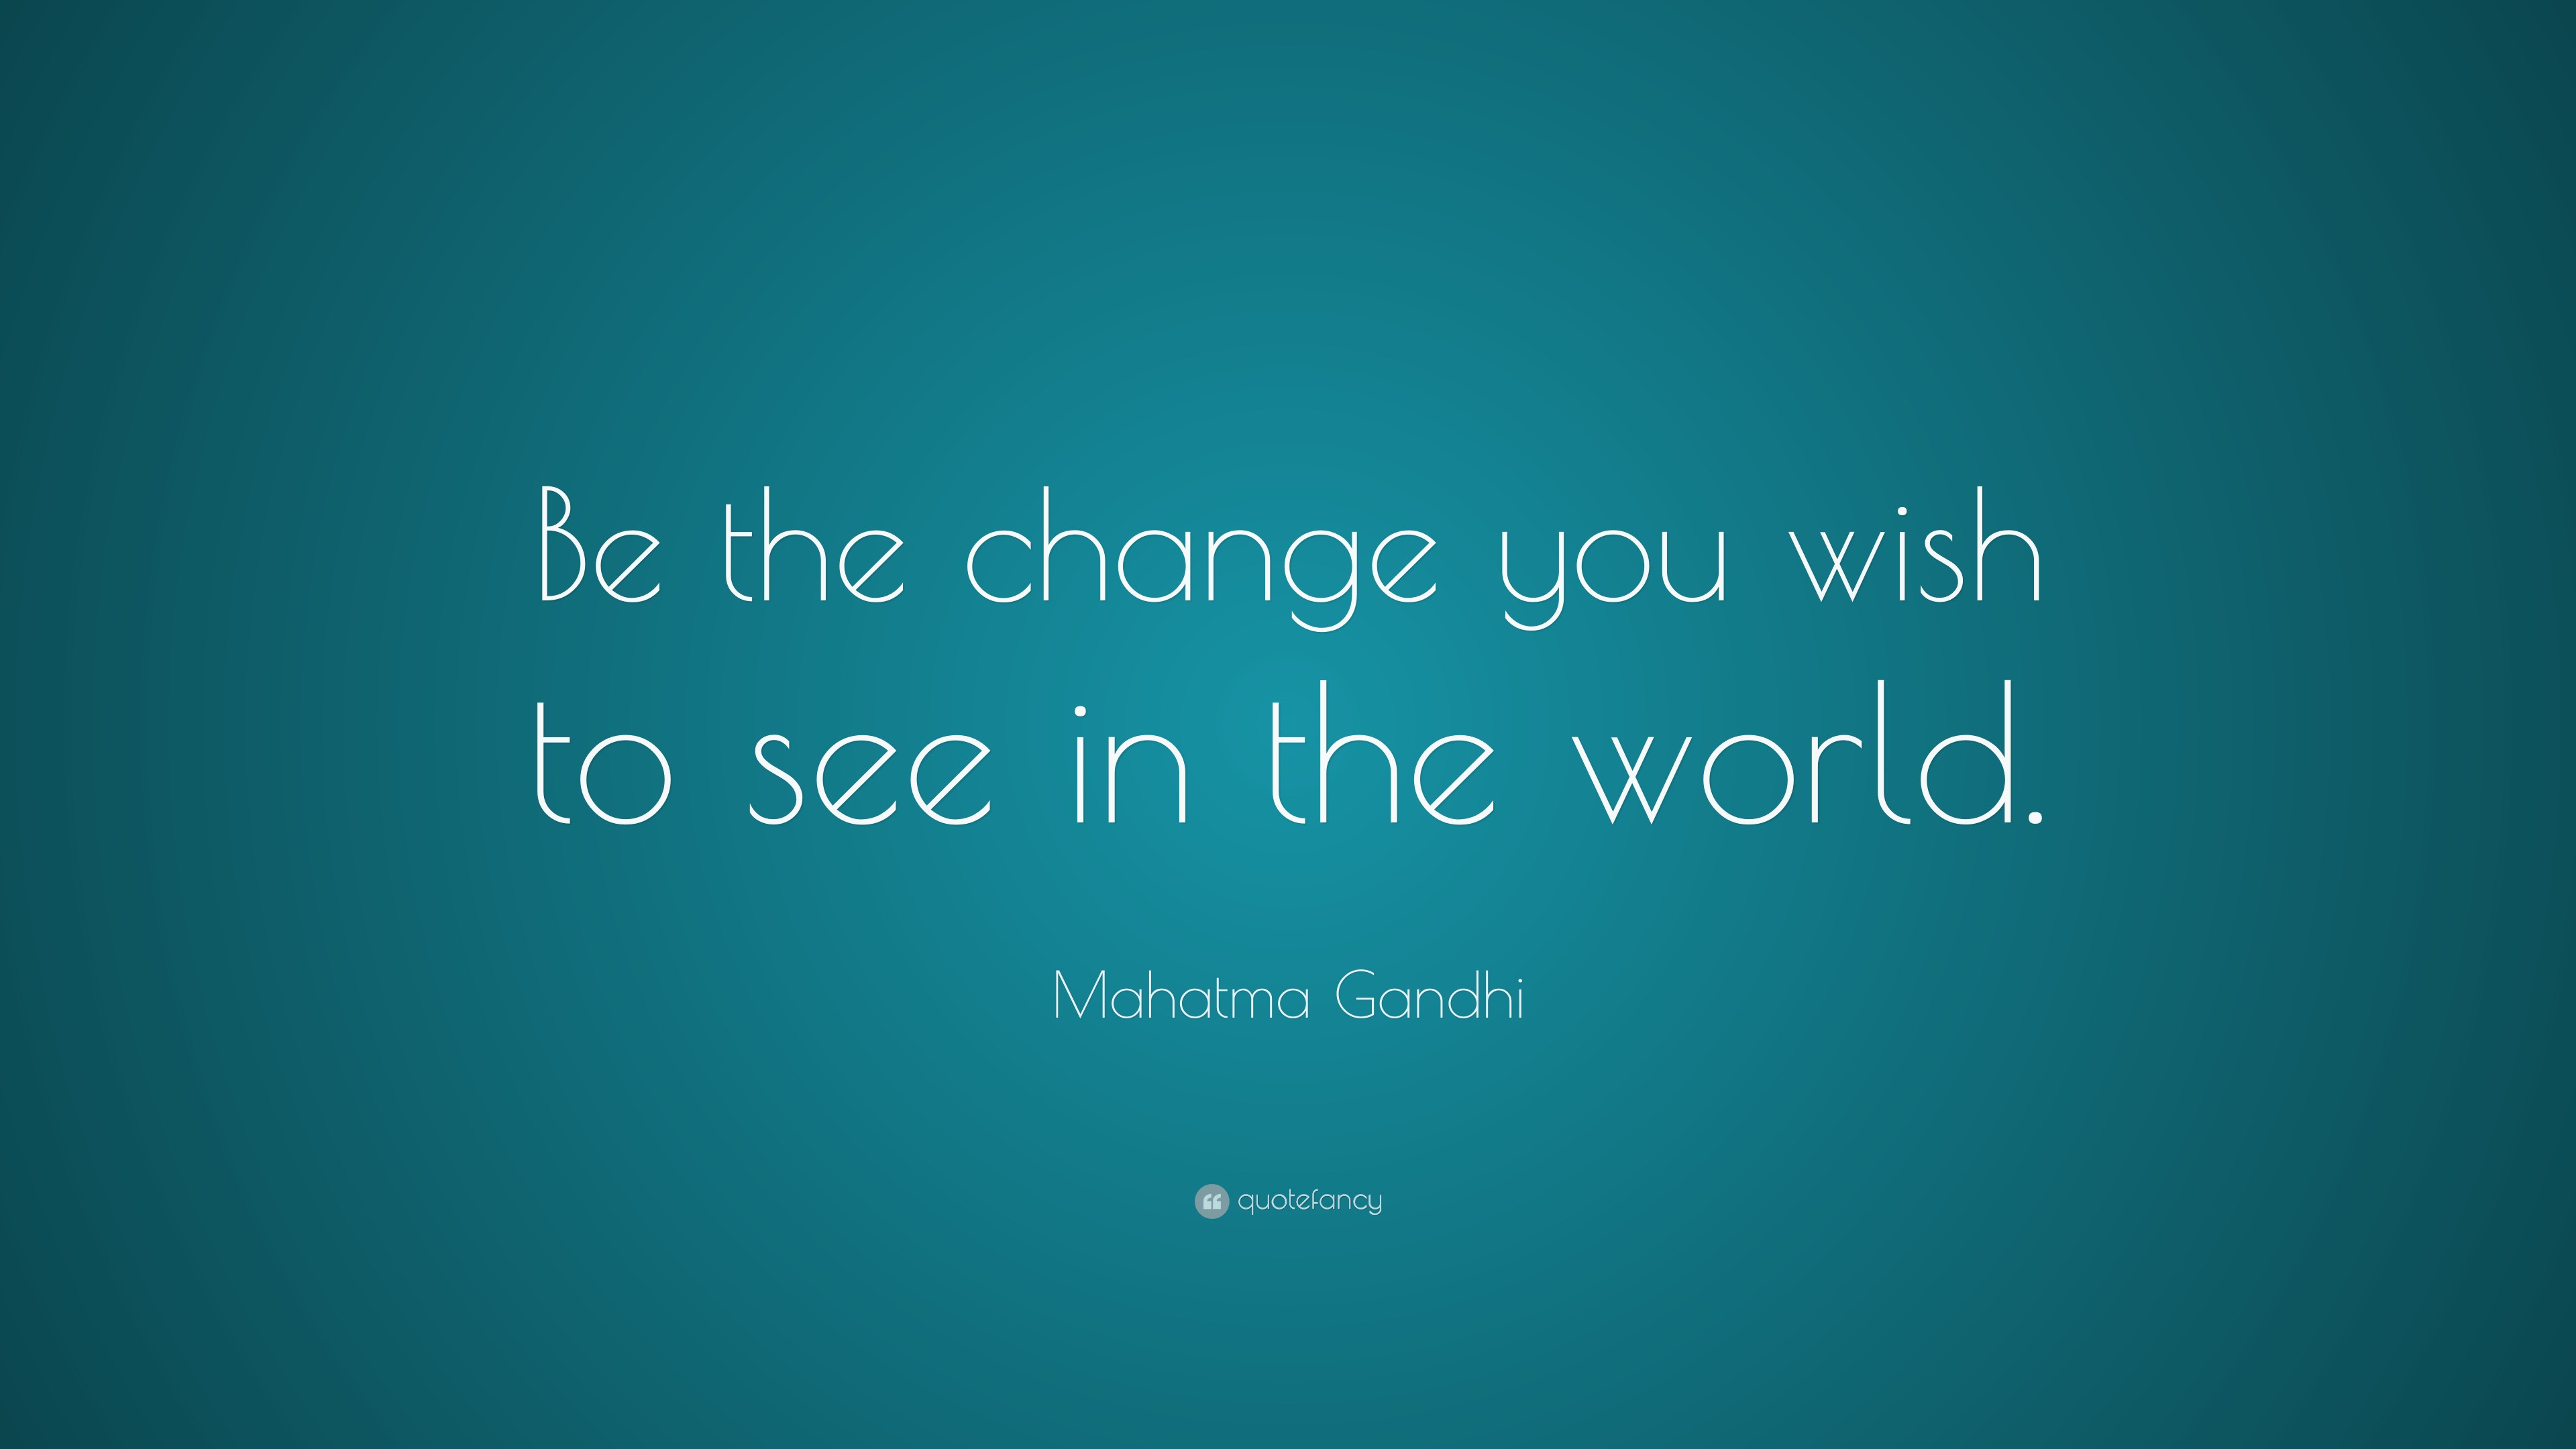 Mahatma Gandhi Quote “be The Change You Wish To See In The World” 35